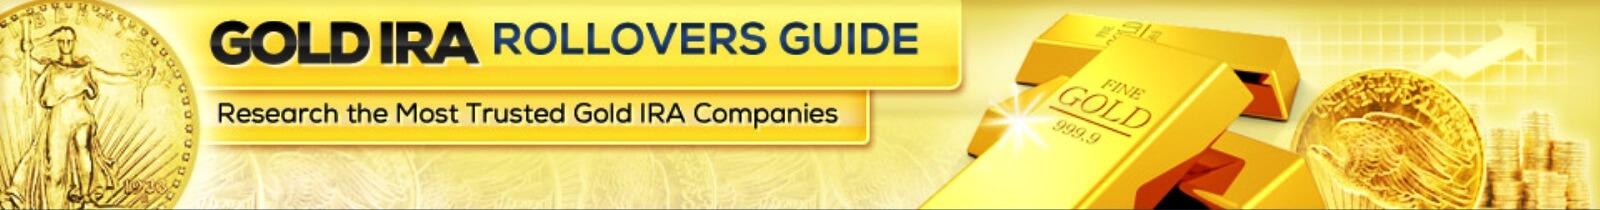 Gold IRA Rollovers Guide